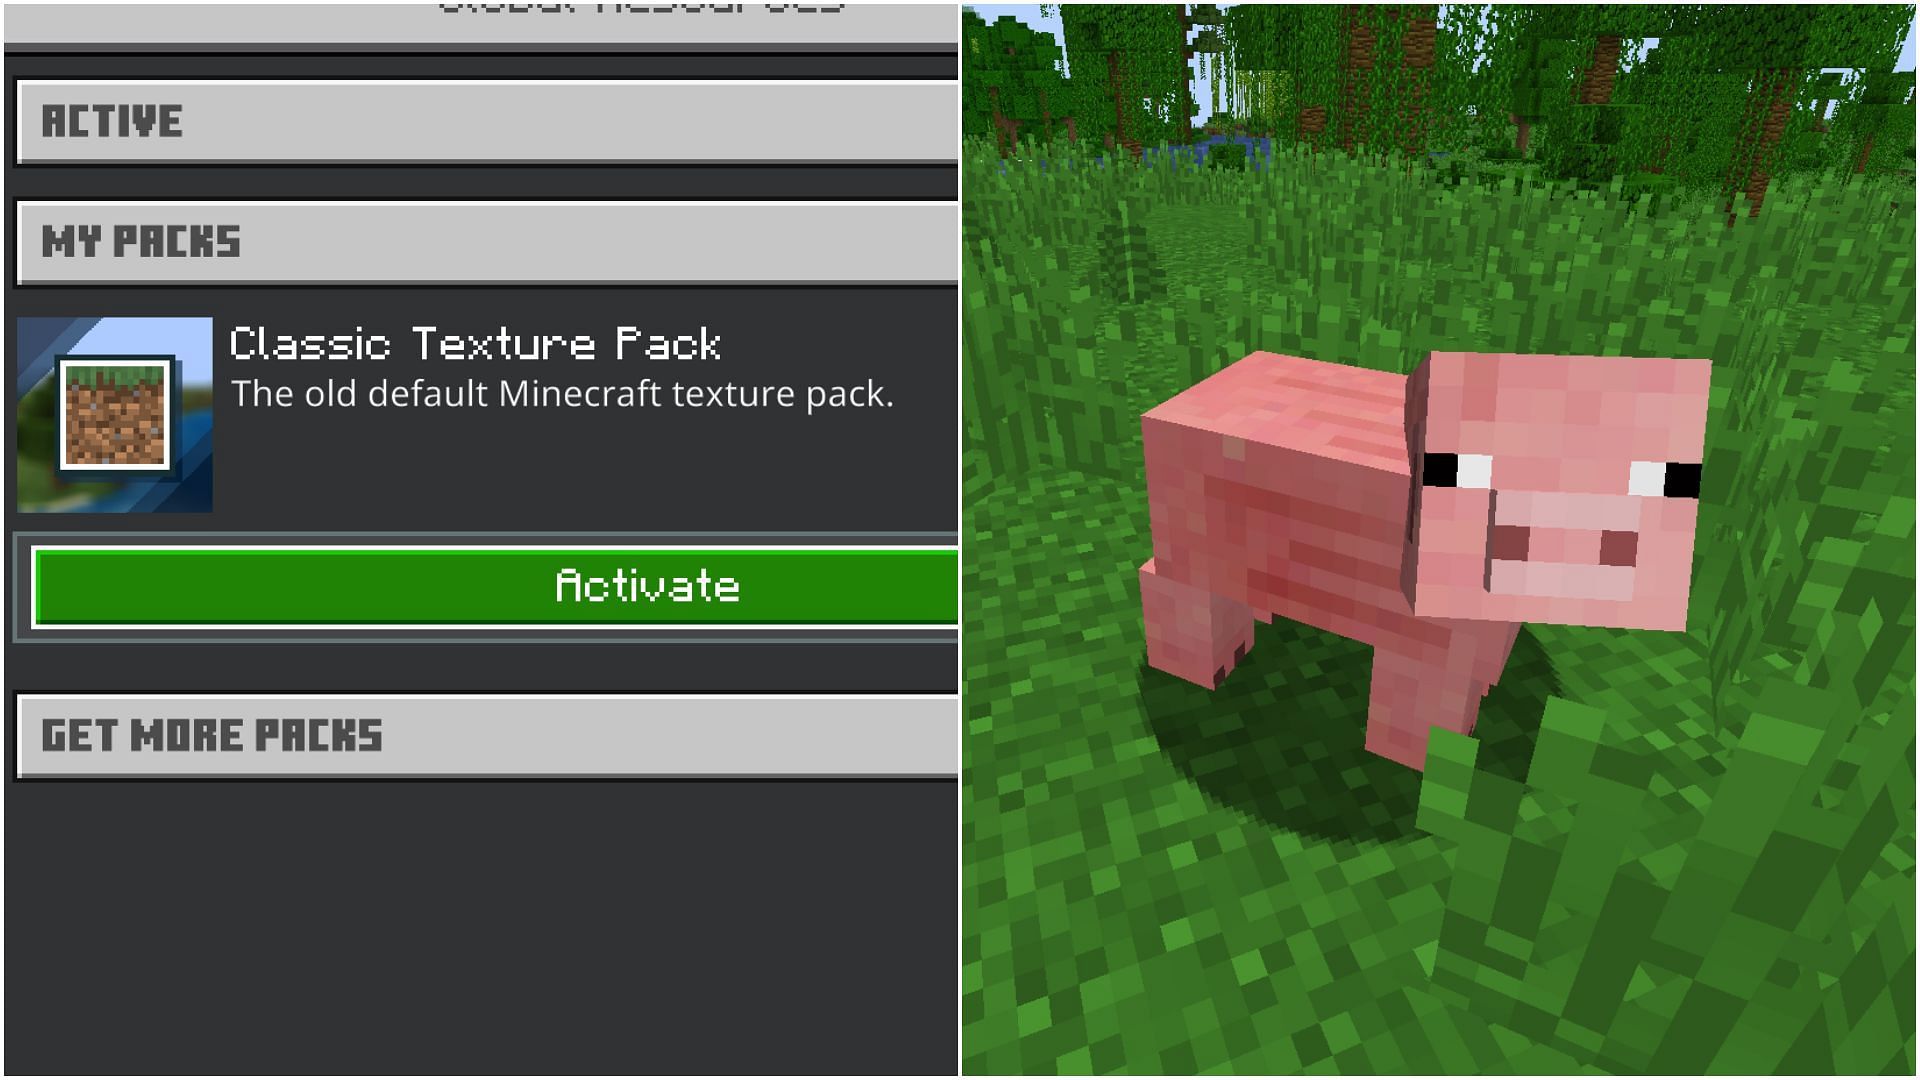 Minecraft Classic Texture Pack  Texture packs, Easter writing, How to play  minecraft